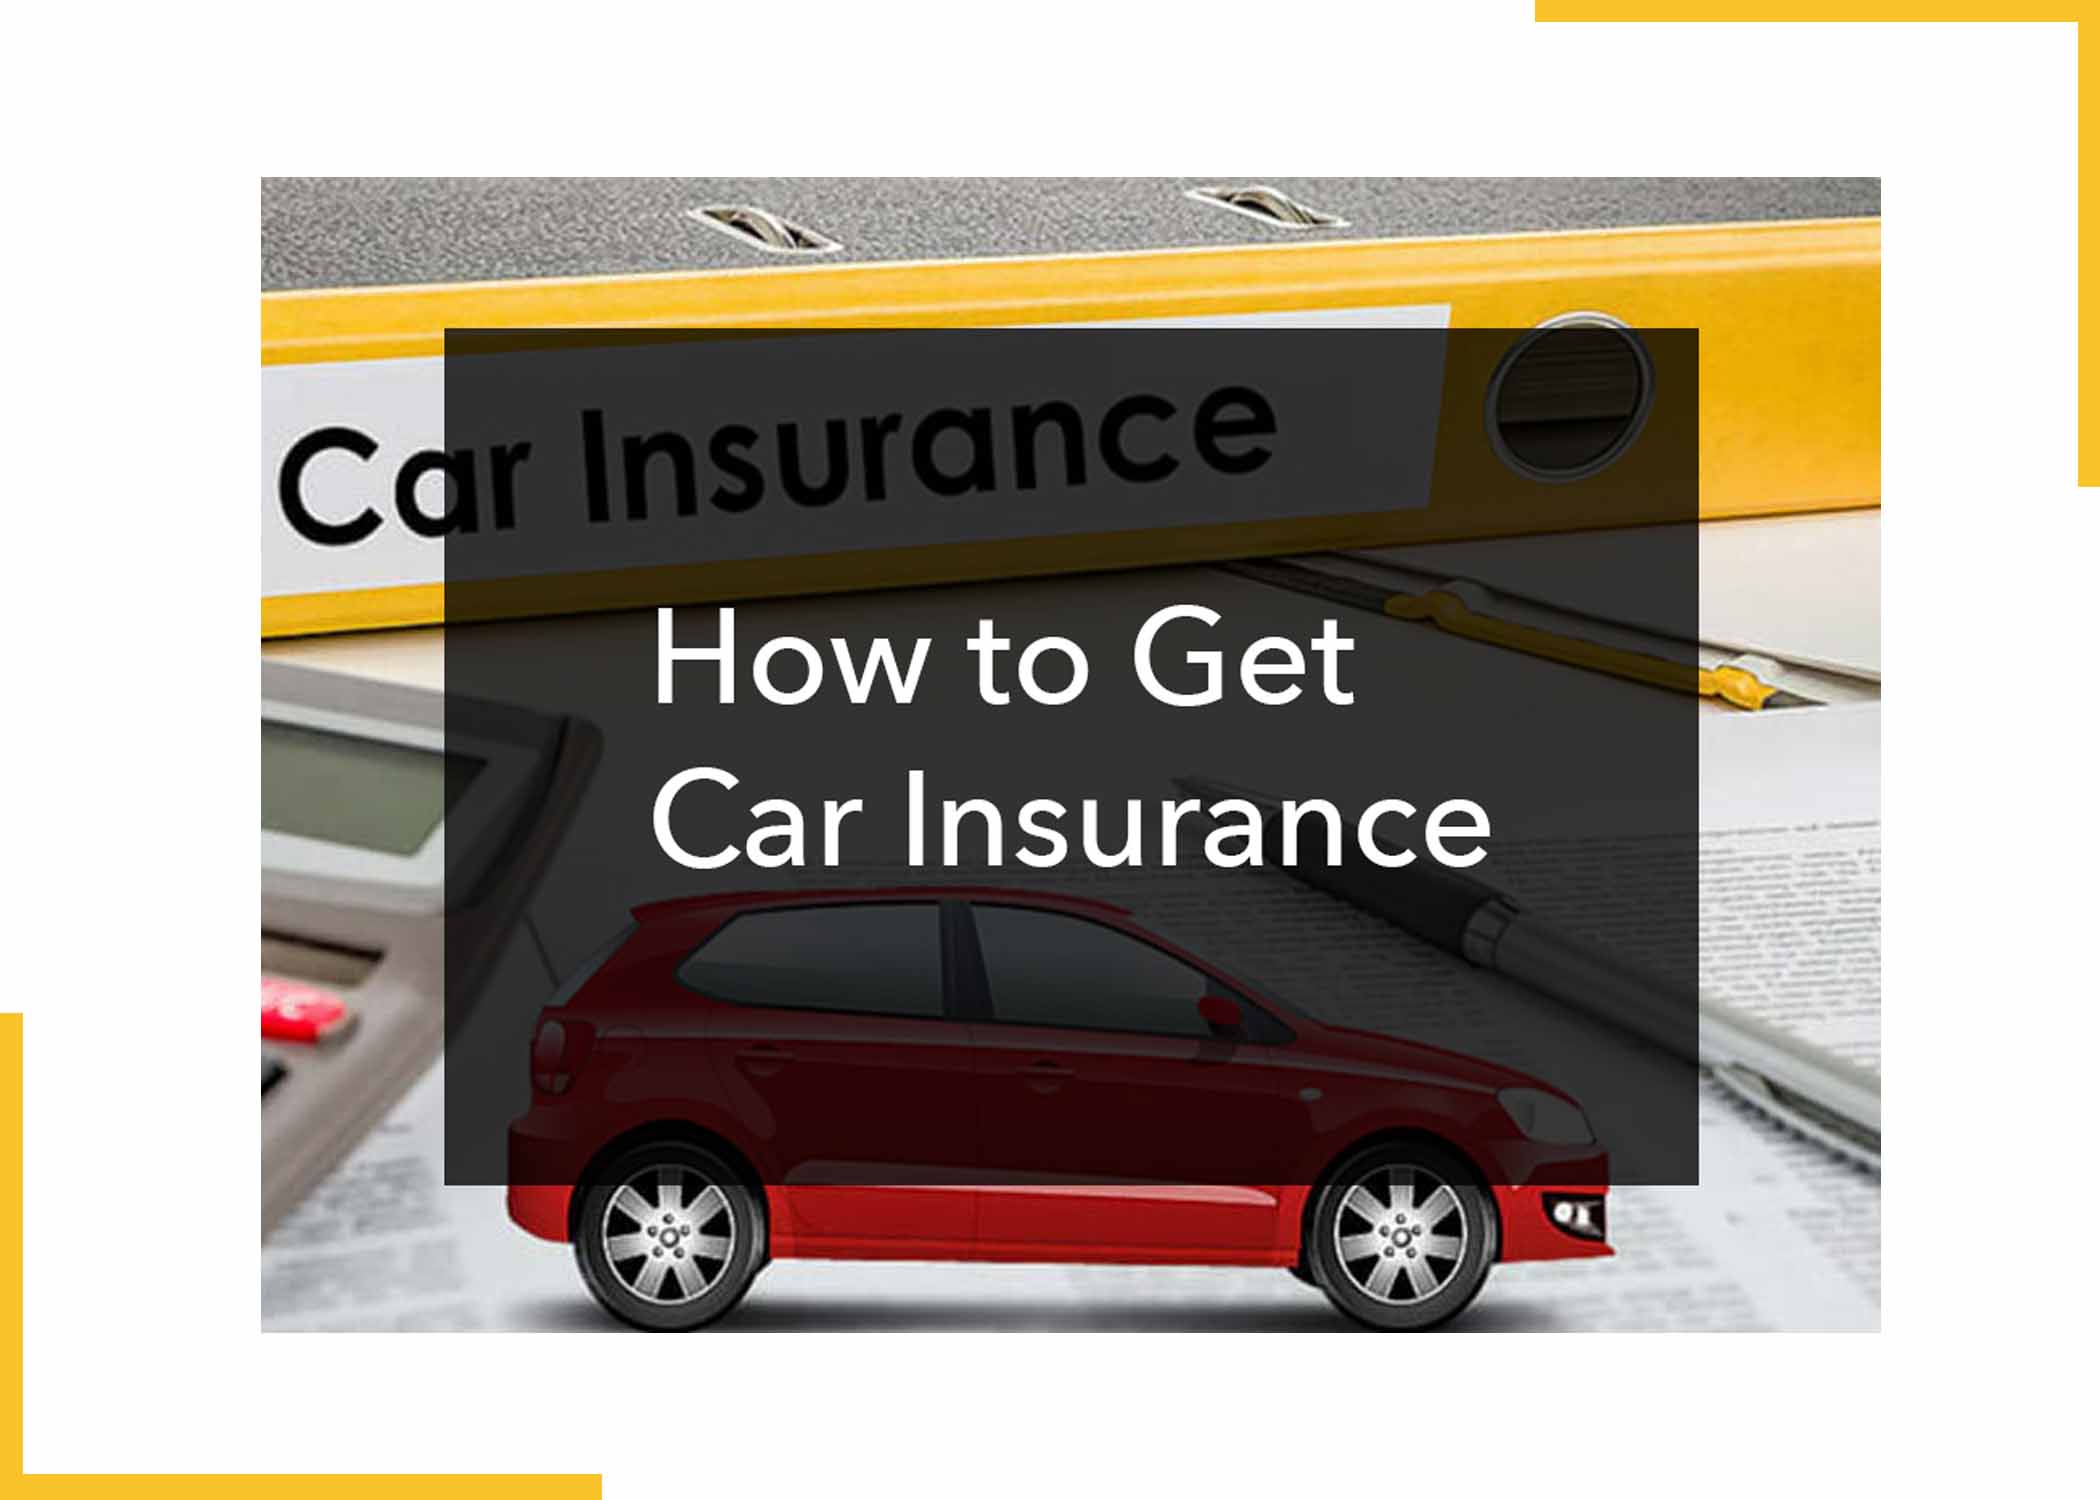 How to Get Car Insurance